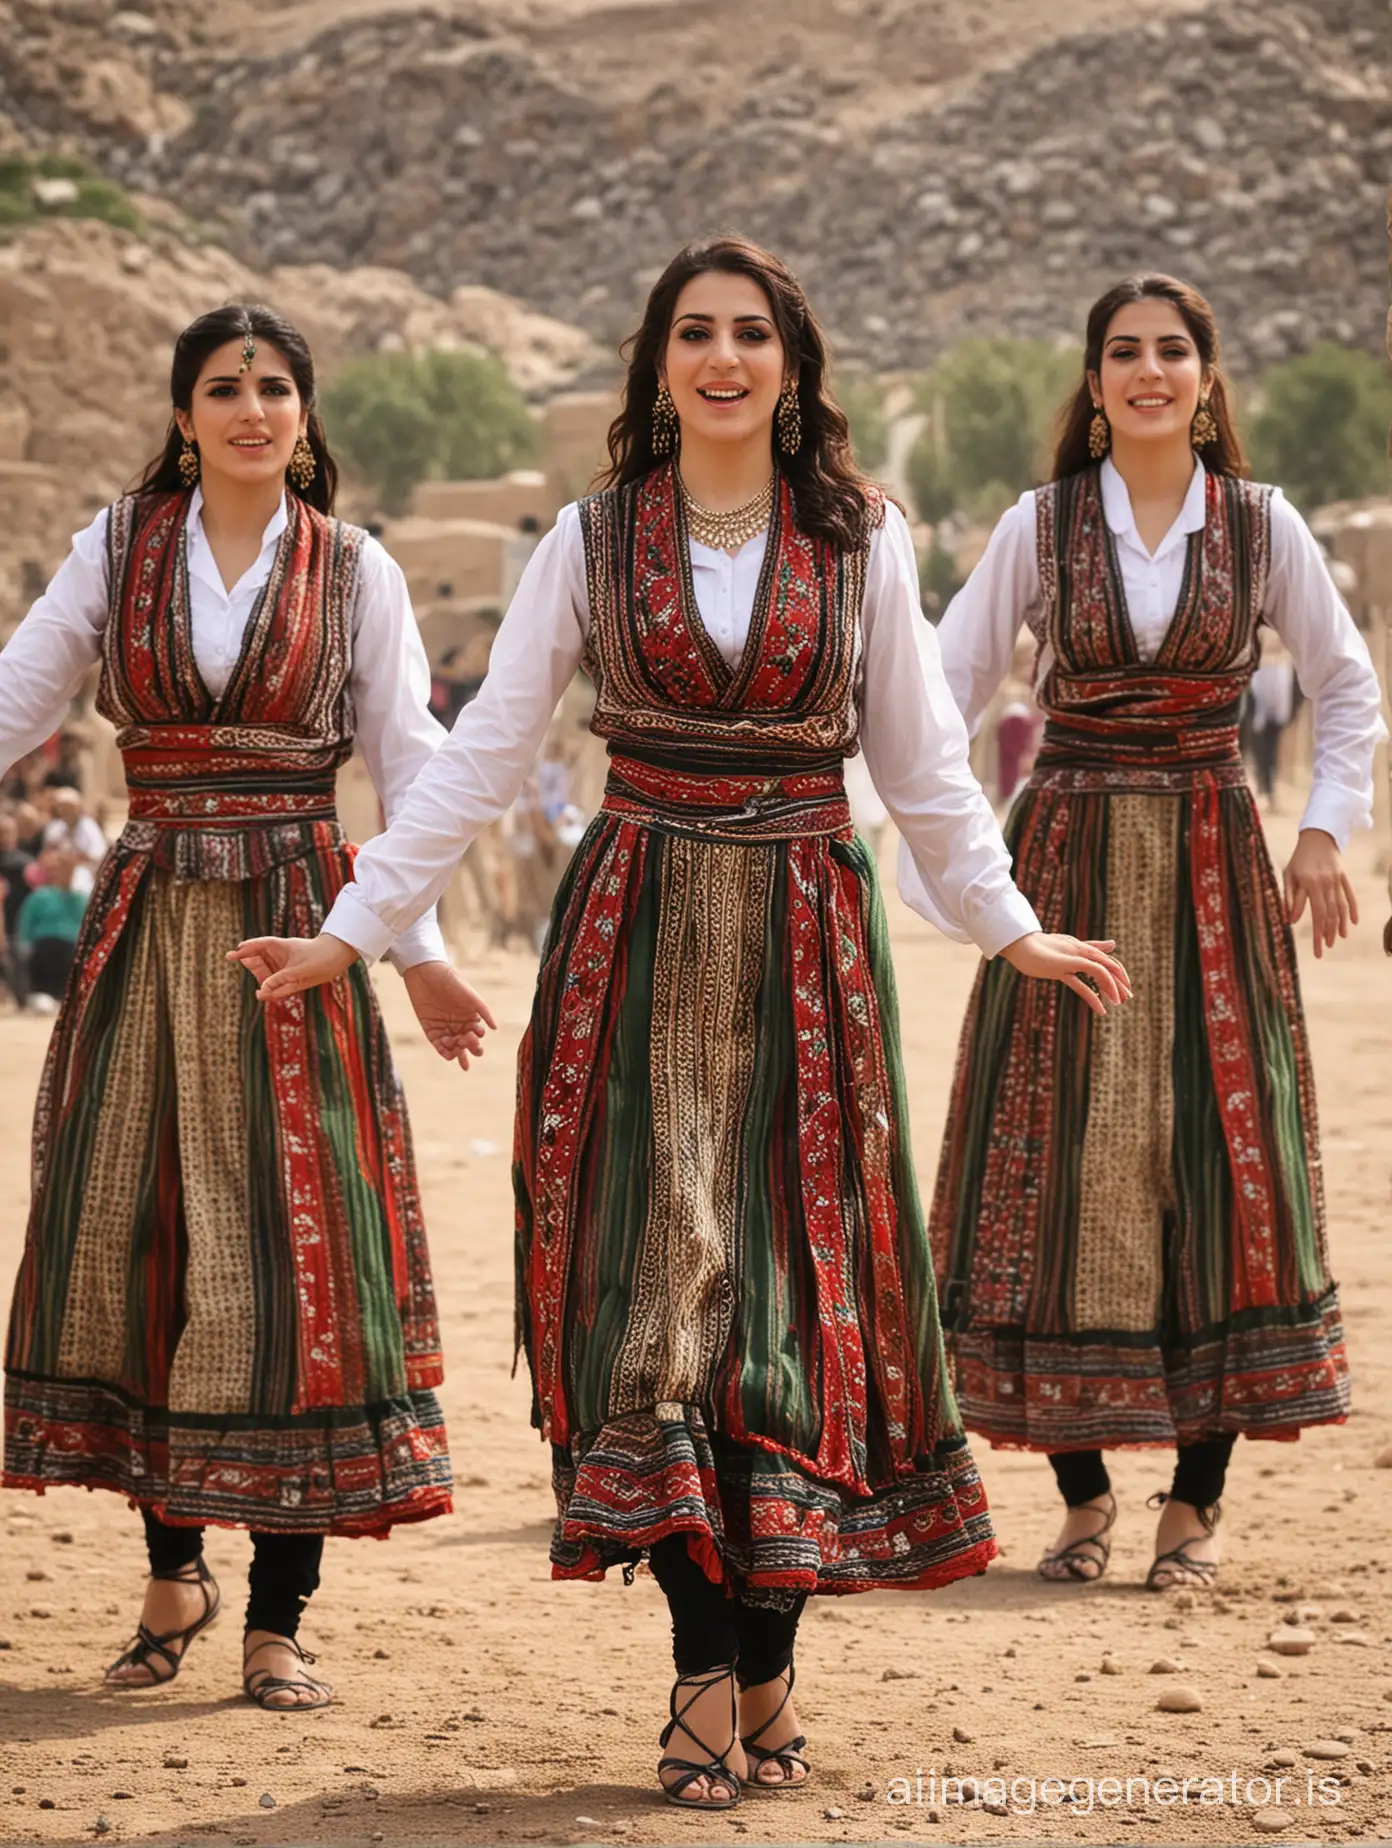 show me a group of Kurdish 
dance from Iran